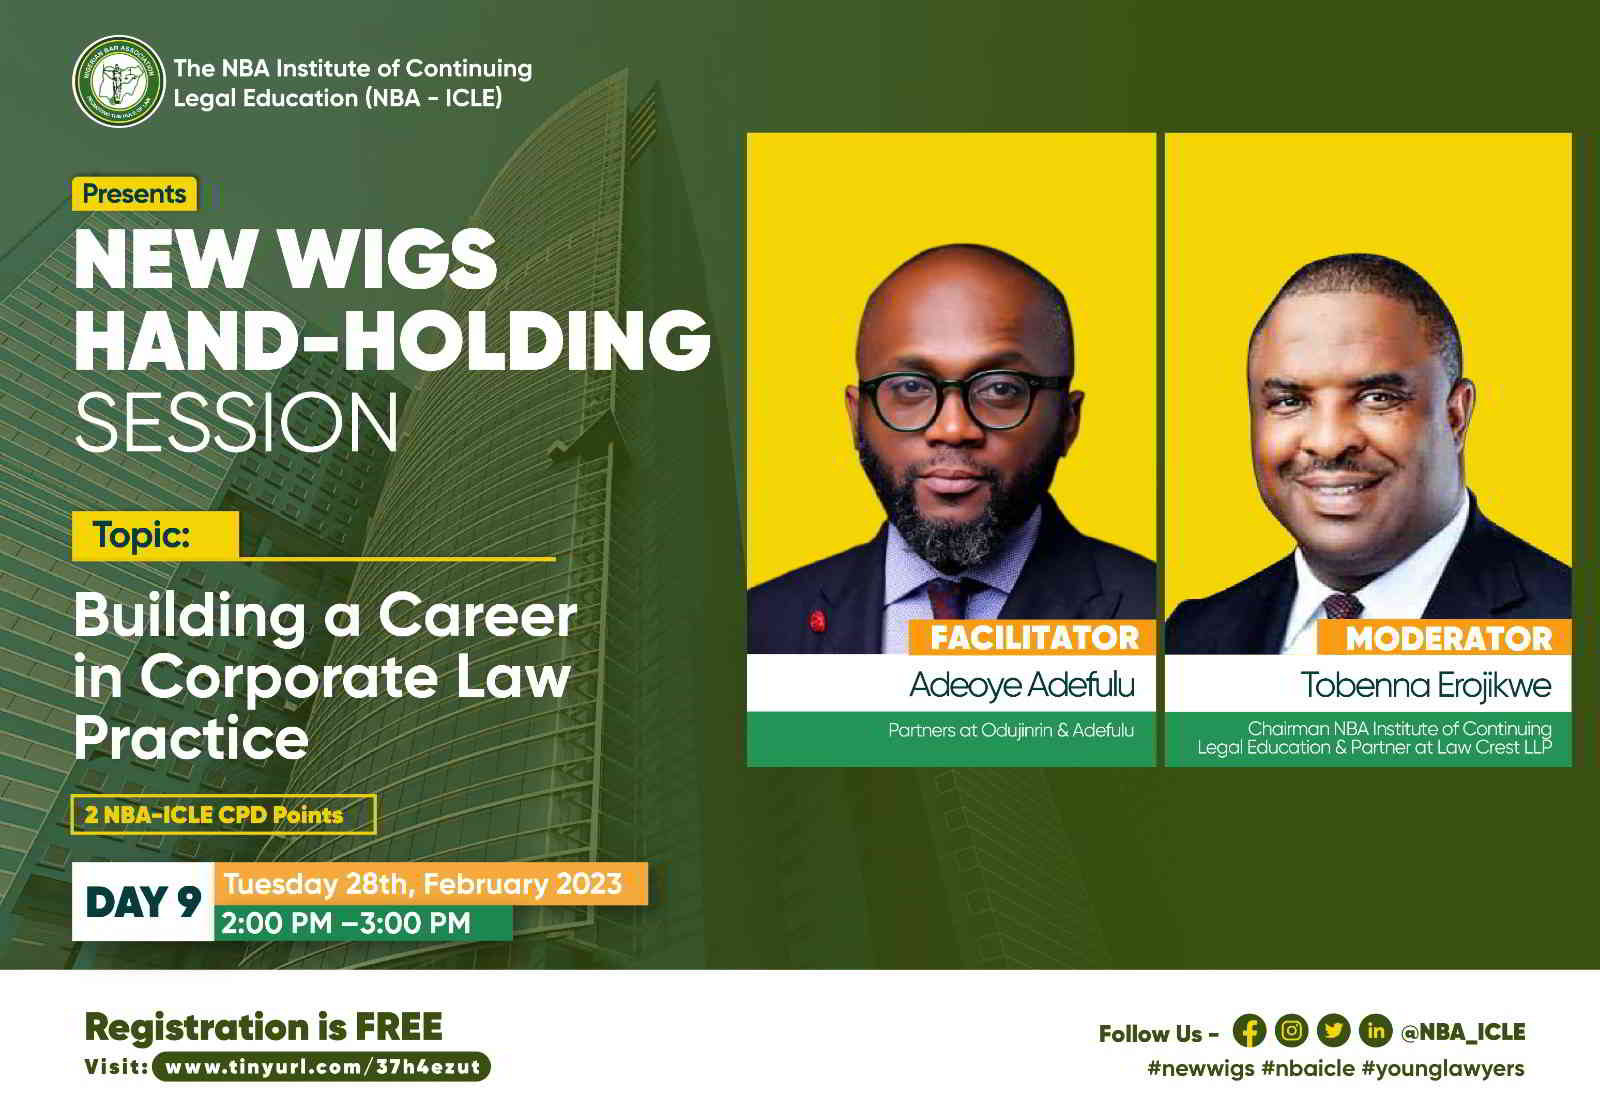 NBA NEW WIGS HAND-HOLDING SERIES (DAY 9): BUILDING A CAREER IN CORPORATE LAW PRACTICE